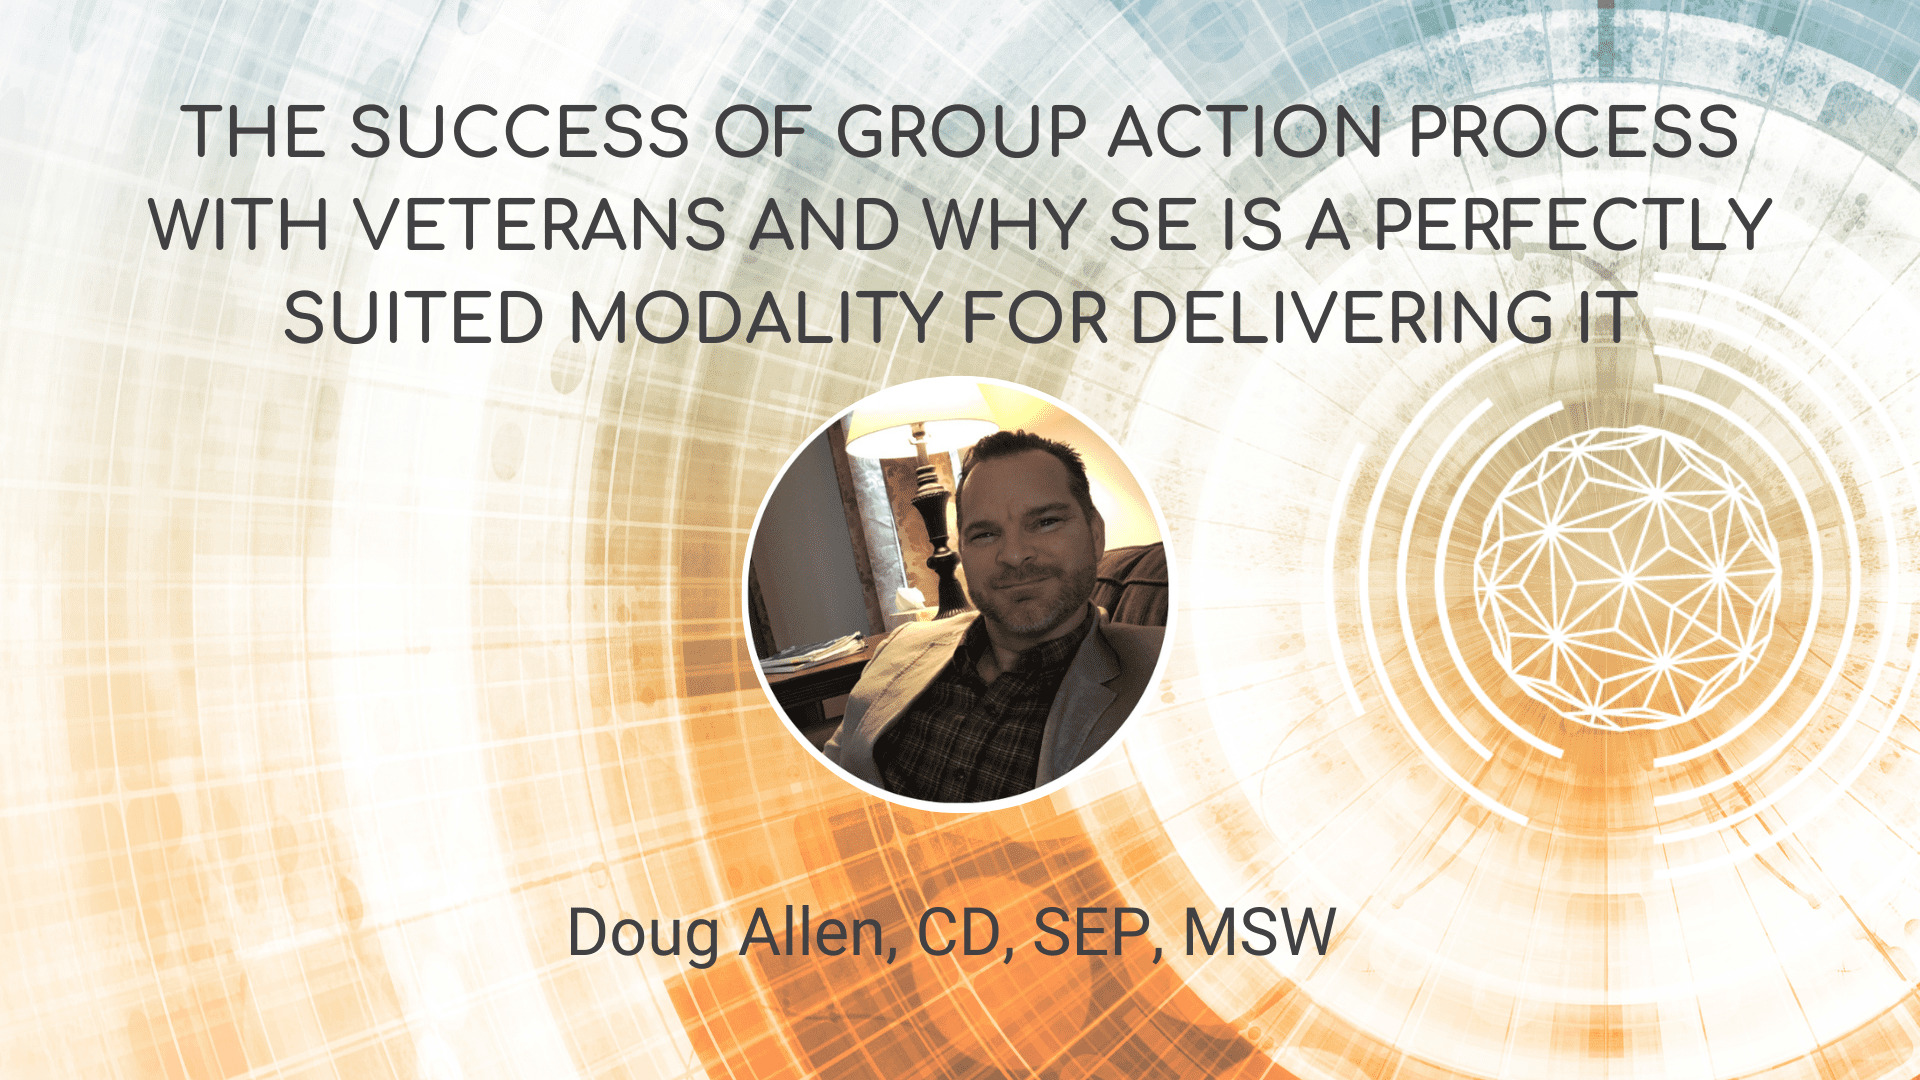 The Success of Group Action Process with Veterans and why SE is a perfectly suited modality for delivering it – Doug Allen, CD, SEP, MSW